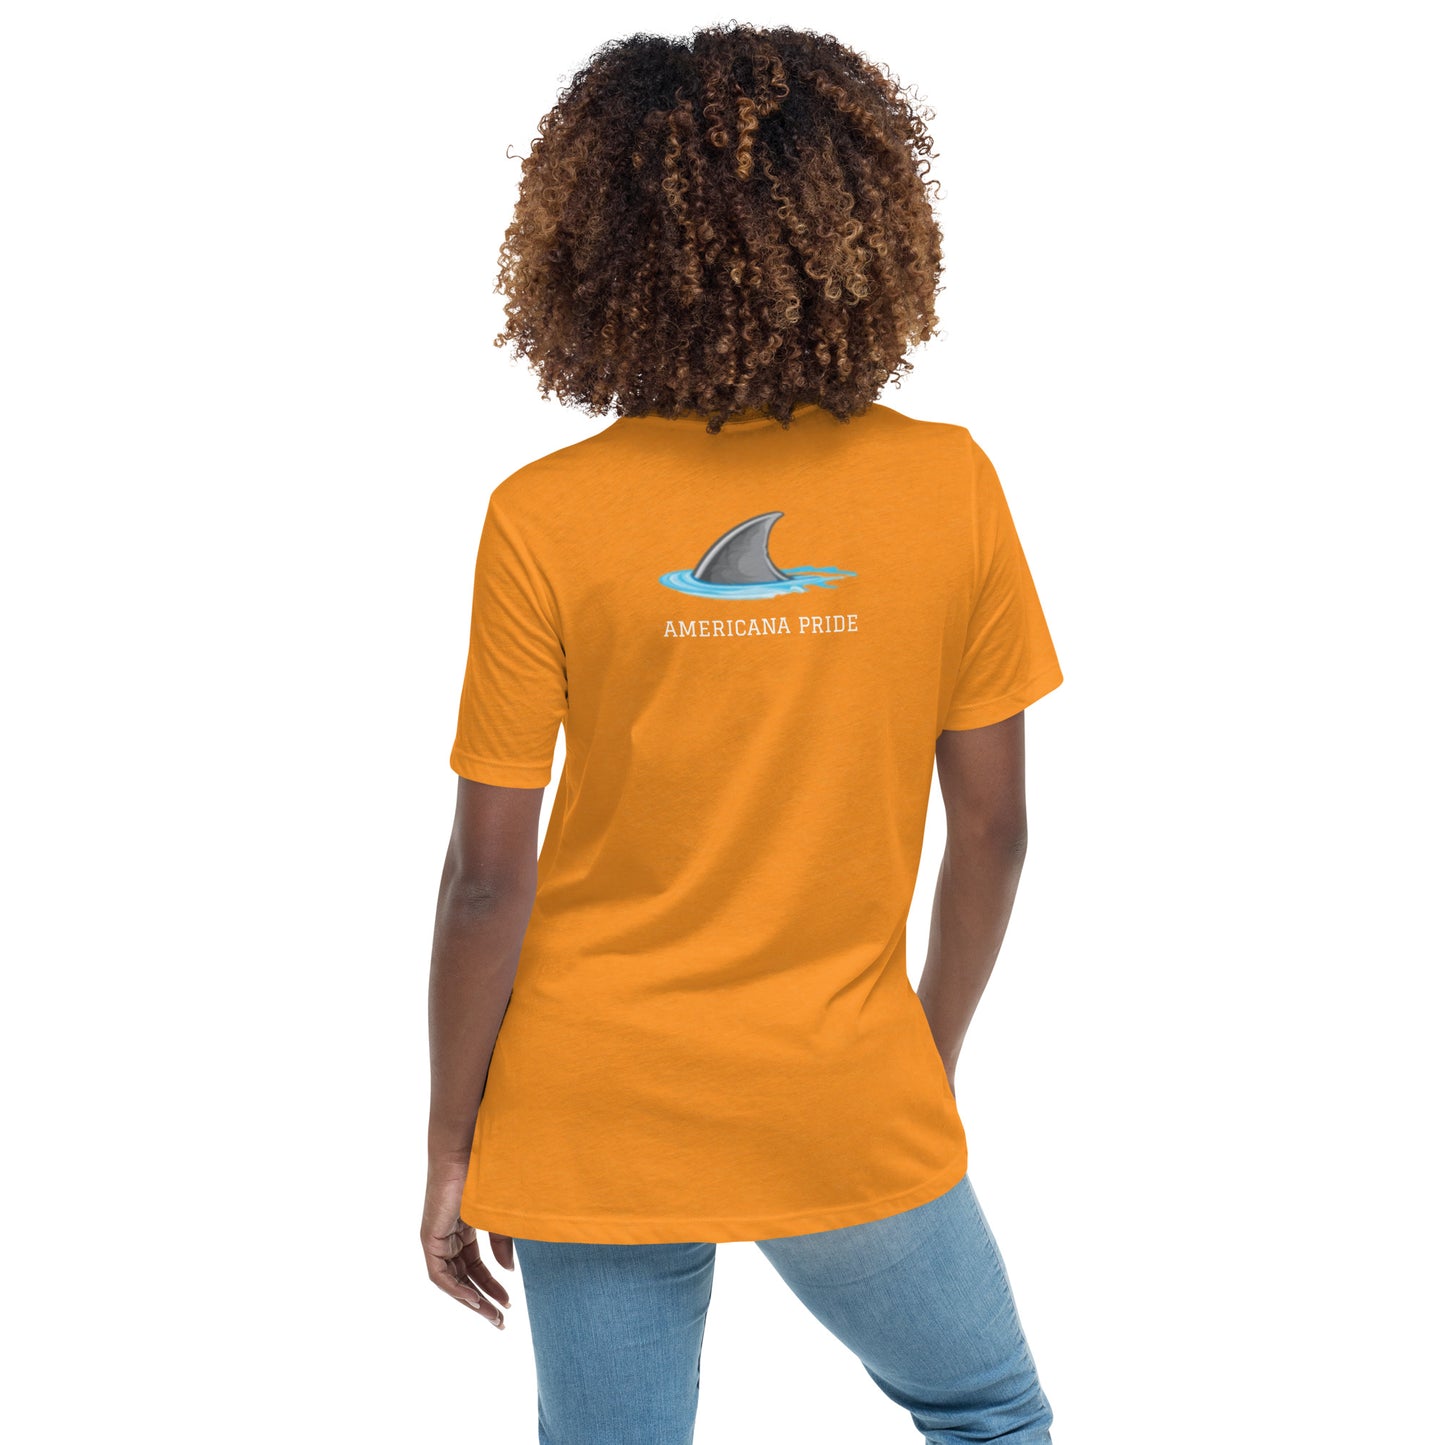 Are you the SHARK or the minnow?  Women's tee (white lettering)